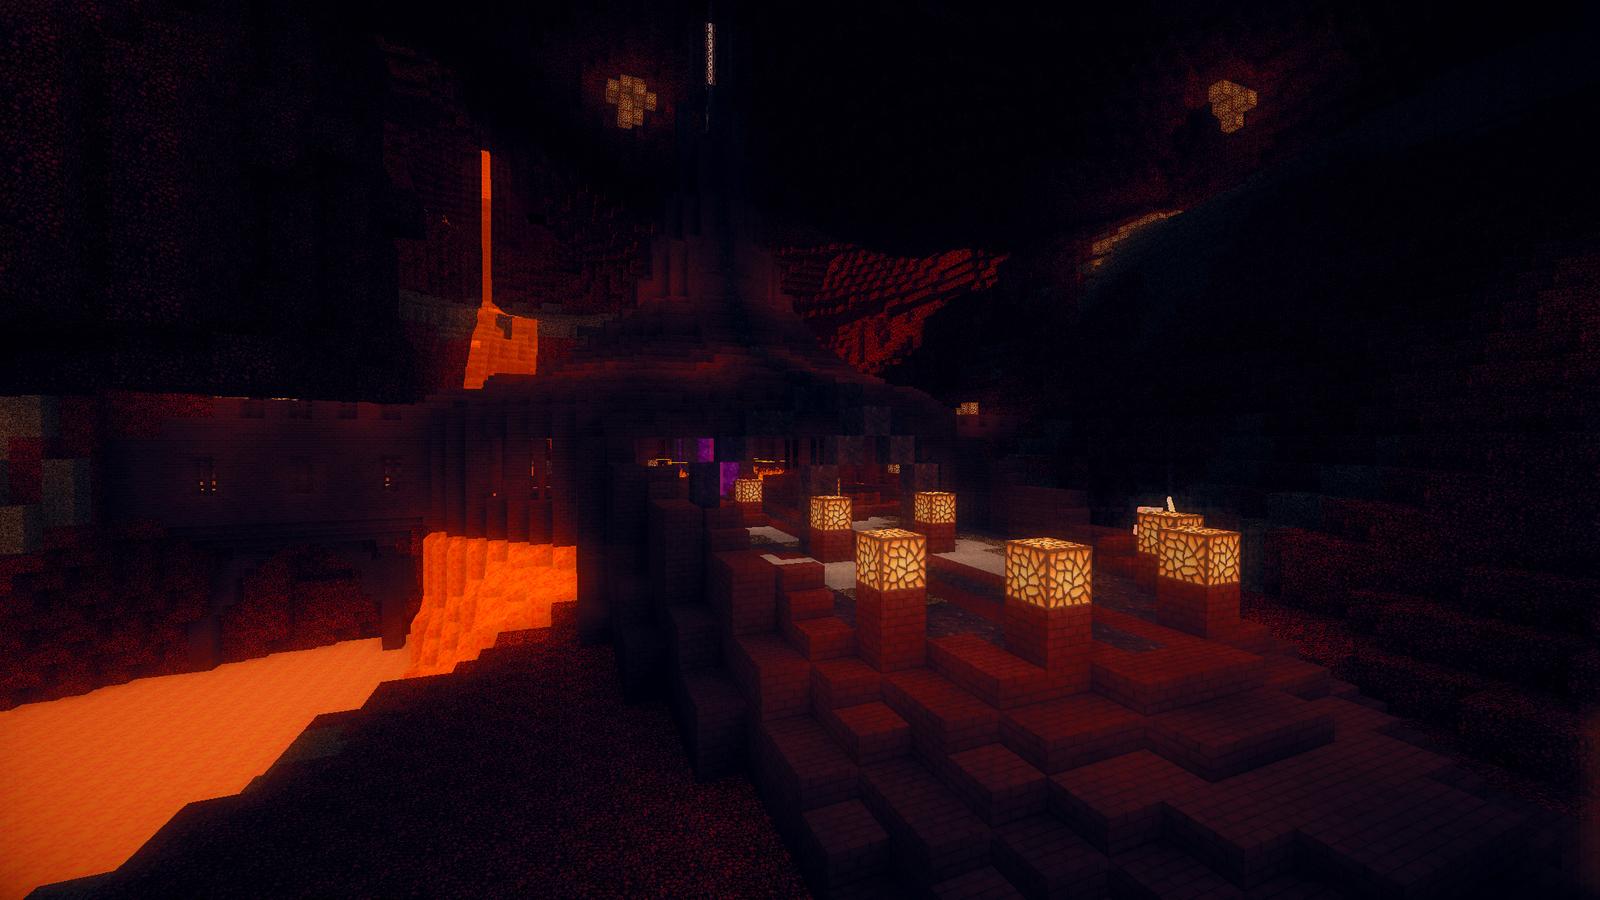 Minecraft Nether Wallpaper. Awesome